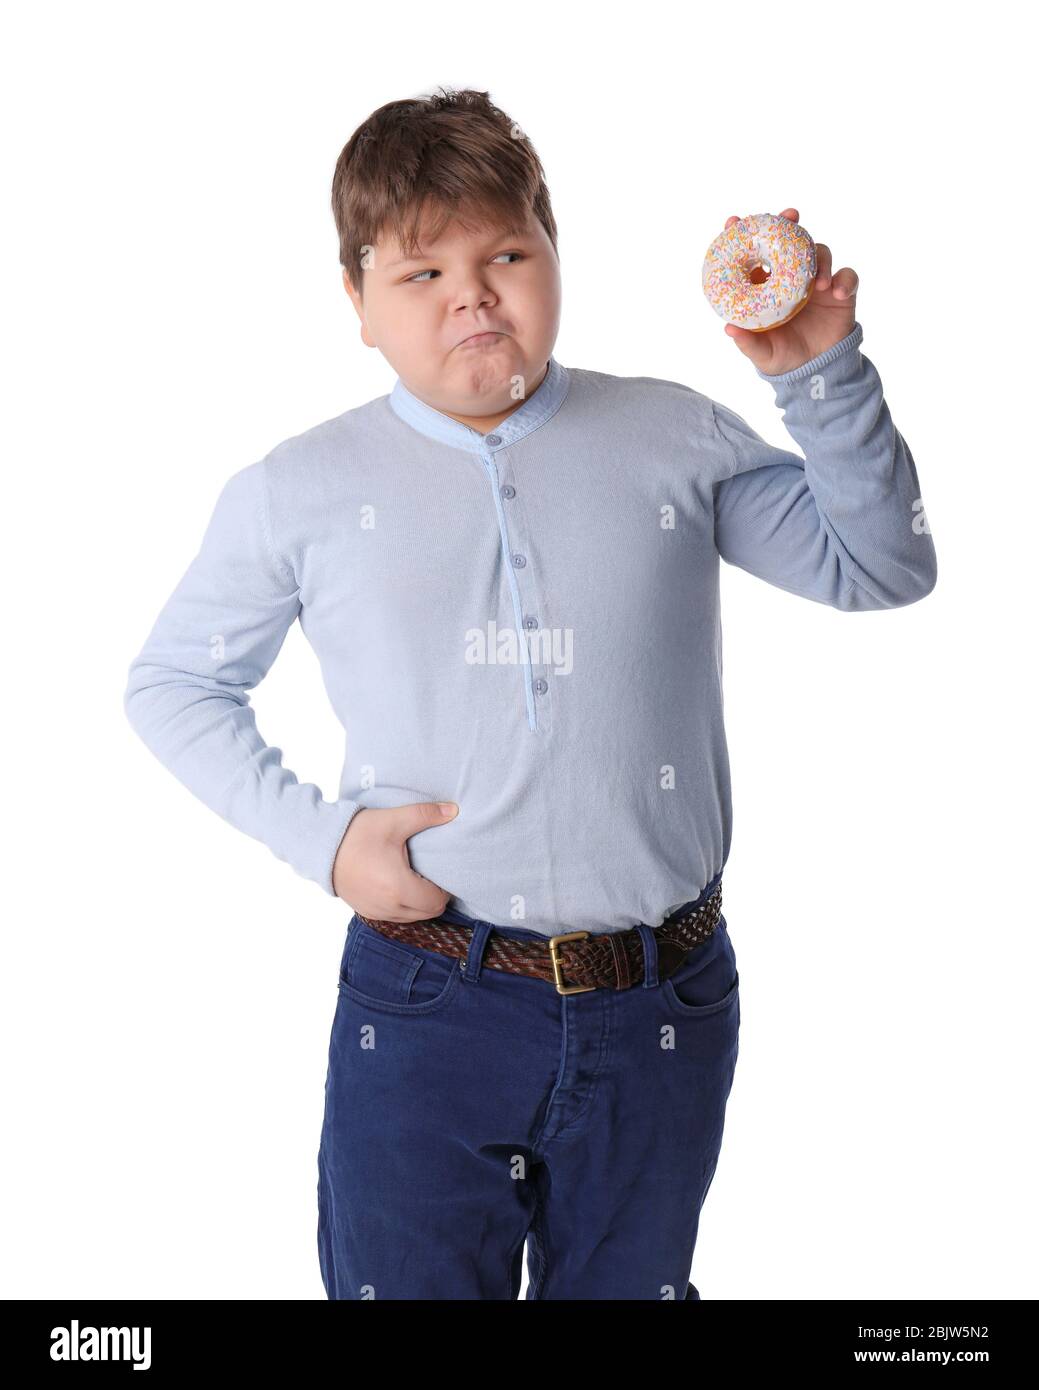 Overweight boy with doughnut on white background Stock Photo